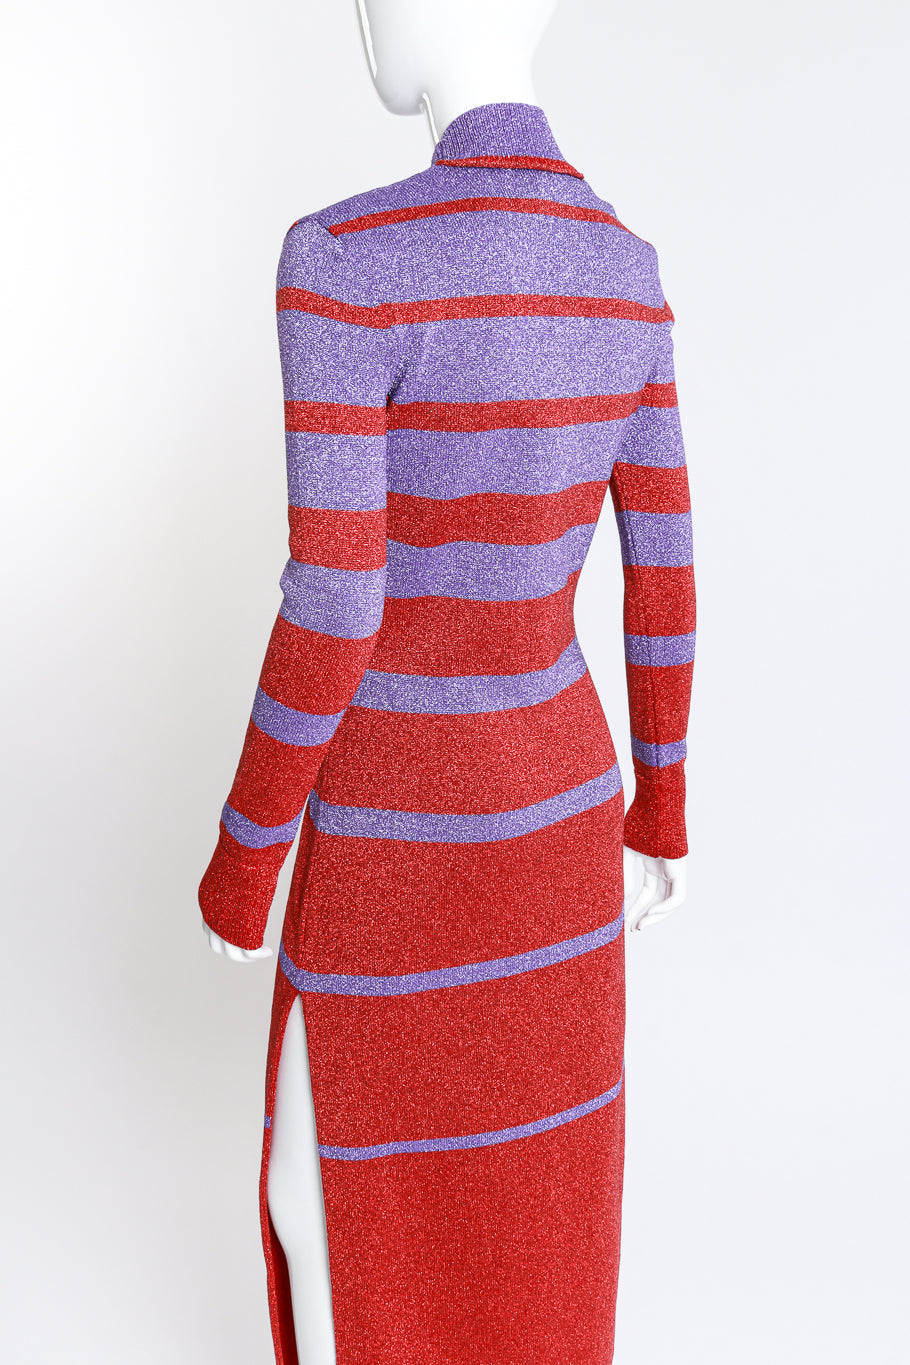 Paco Rabanne Striped Metallic Knit Maxi Dress on mannequin back view at Recess LA